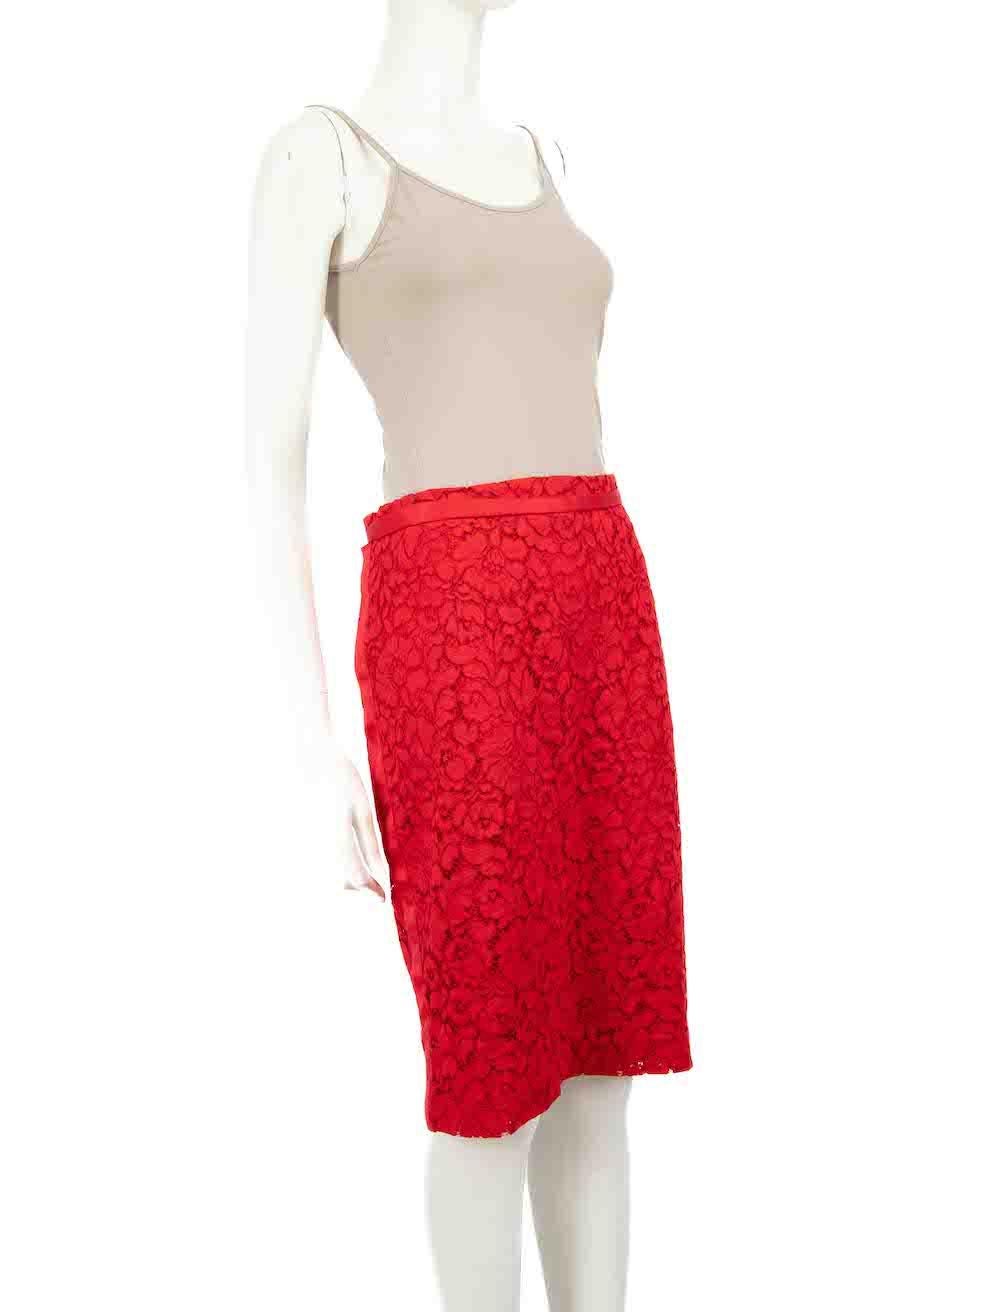 CONDITION is Very good. Minimal wear to skirt is evident. Minimal wear with a few marks on the inside lining of the skirt on this used Carolina Herrera designer resale item.
 
 
 
 Details
 
 
 Red
 
 Lace
 
 Pencil skirt
 
 Knee length
 
 Side snap